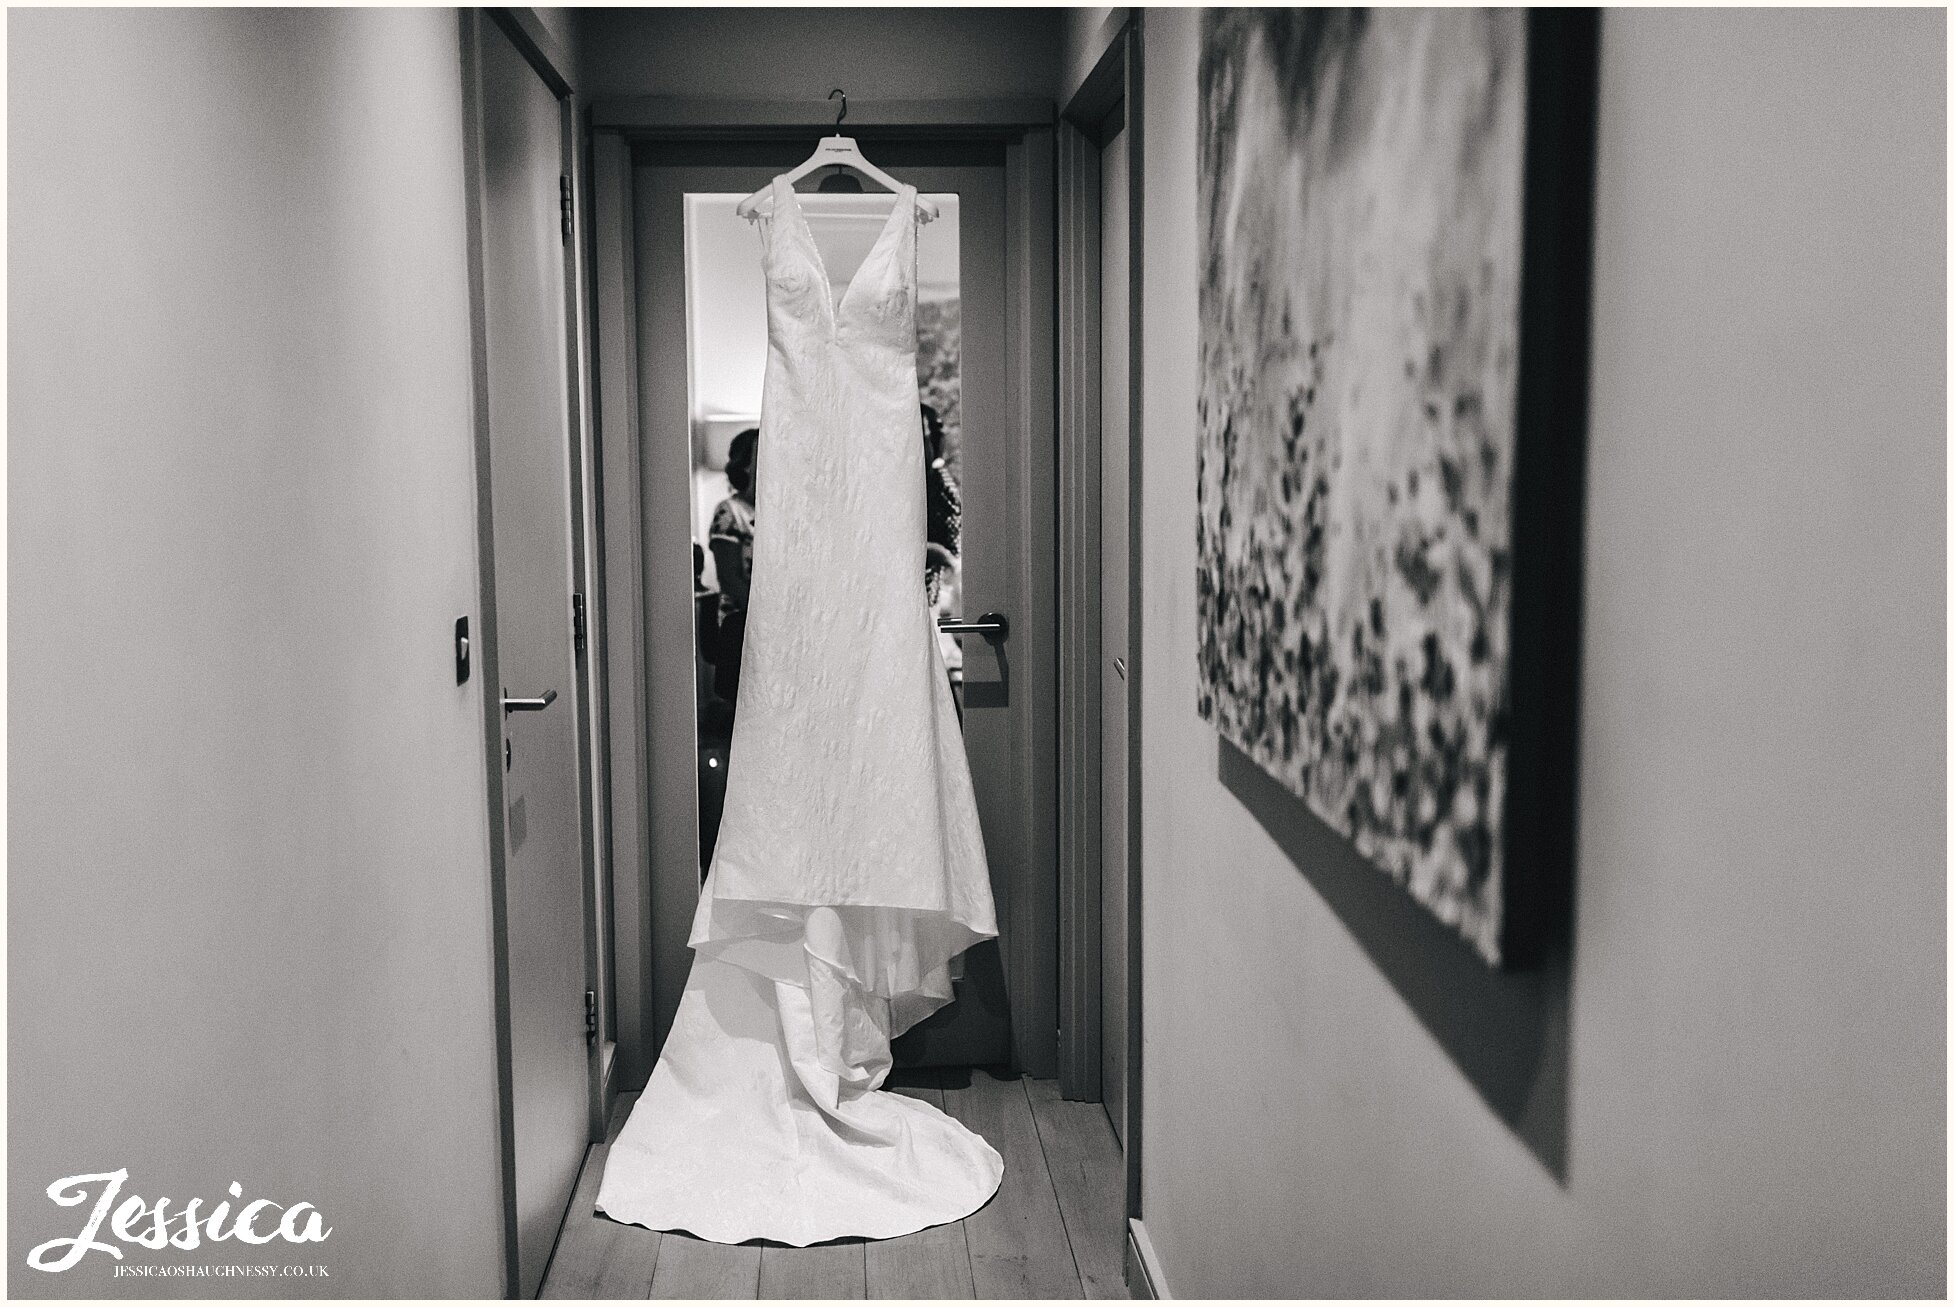 the brides wedding dress hangs ready for the ceremony at the midland hotel